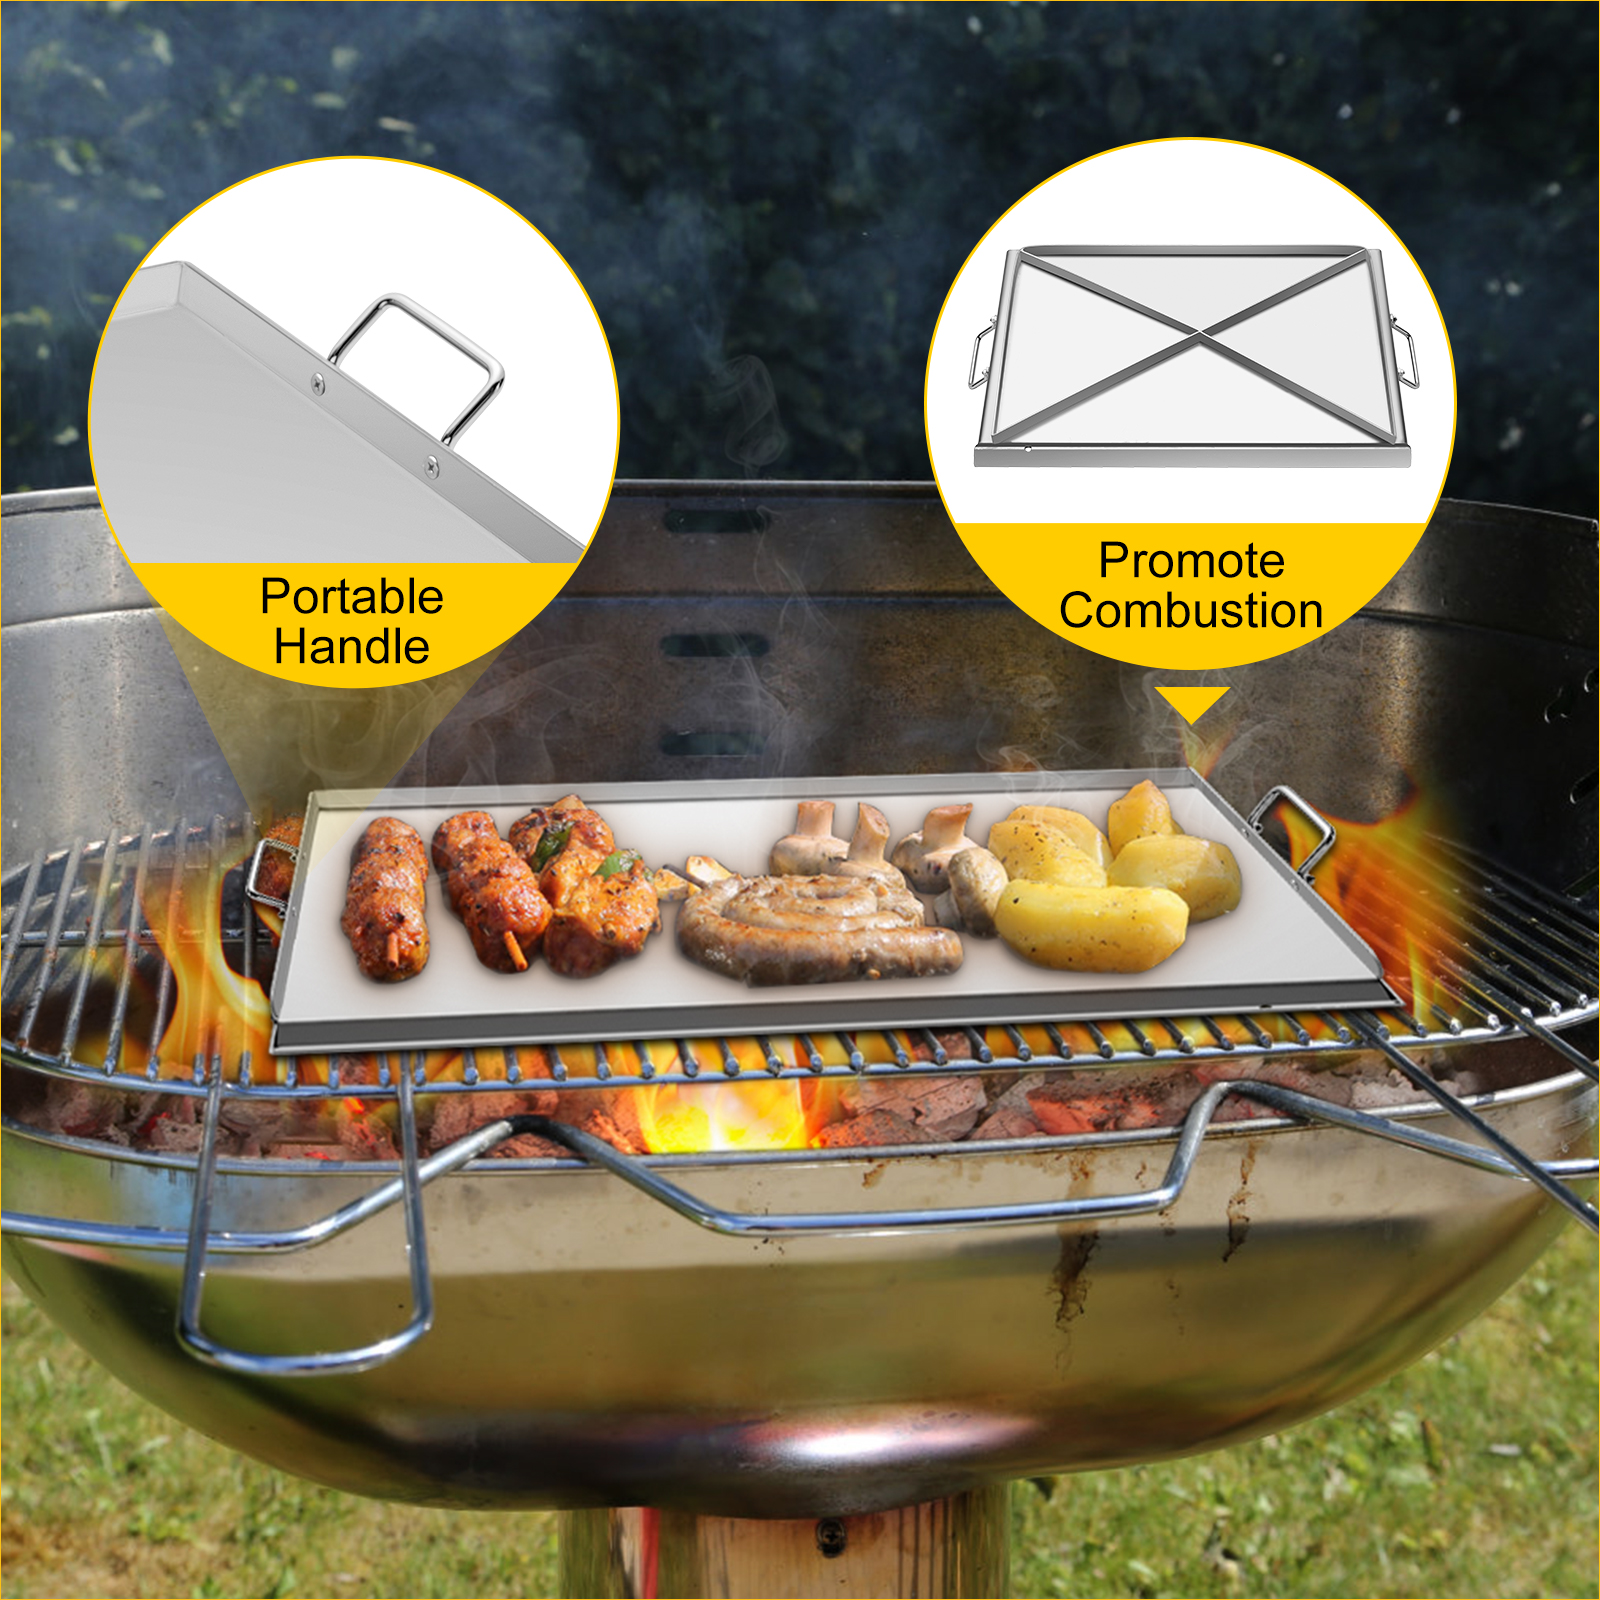 VEVOR Flat Top Griddle For Gas Grill Solid Flat Top Grill Stove 17 23 37